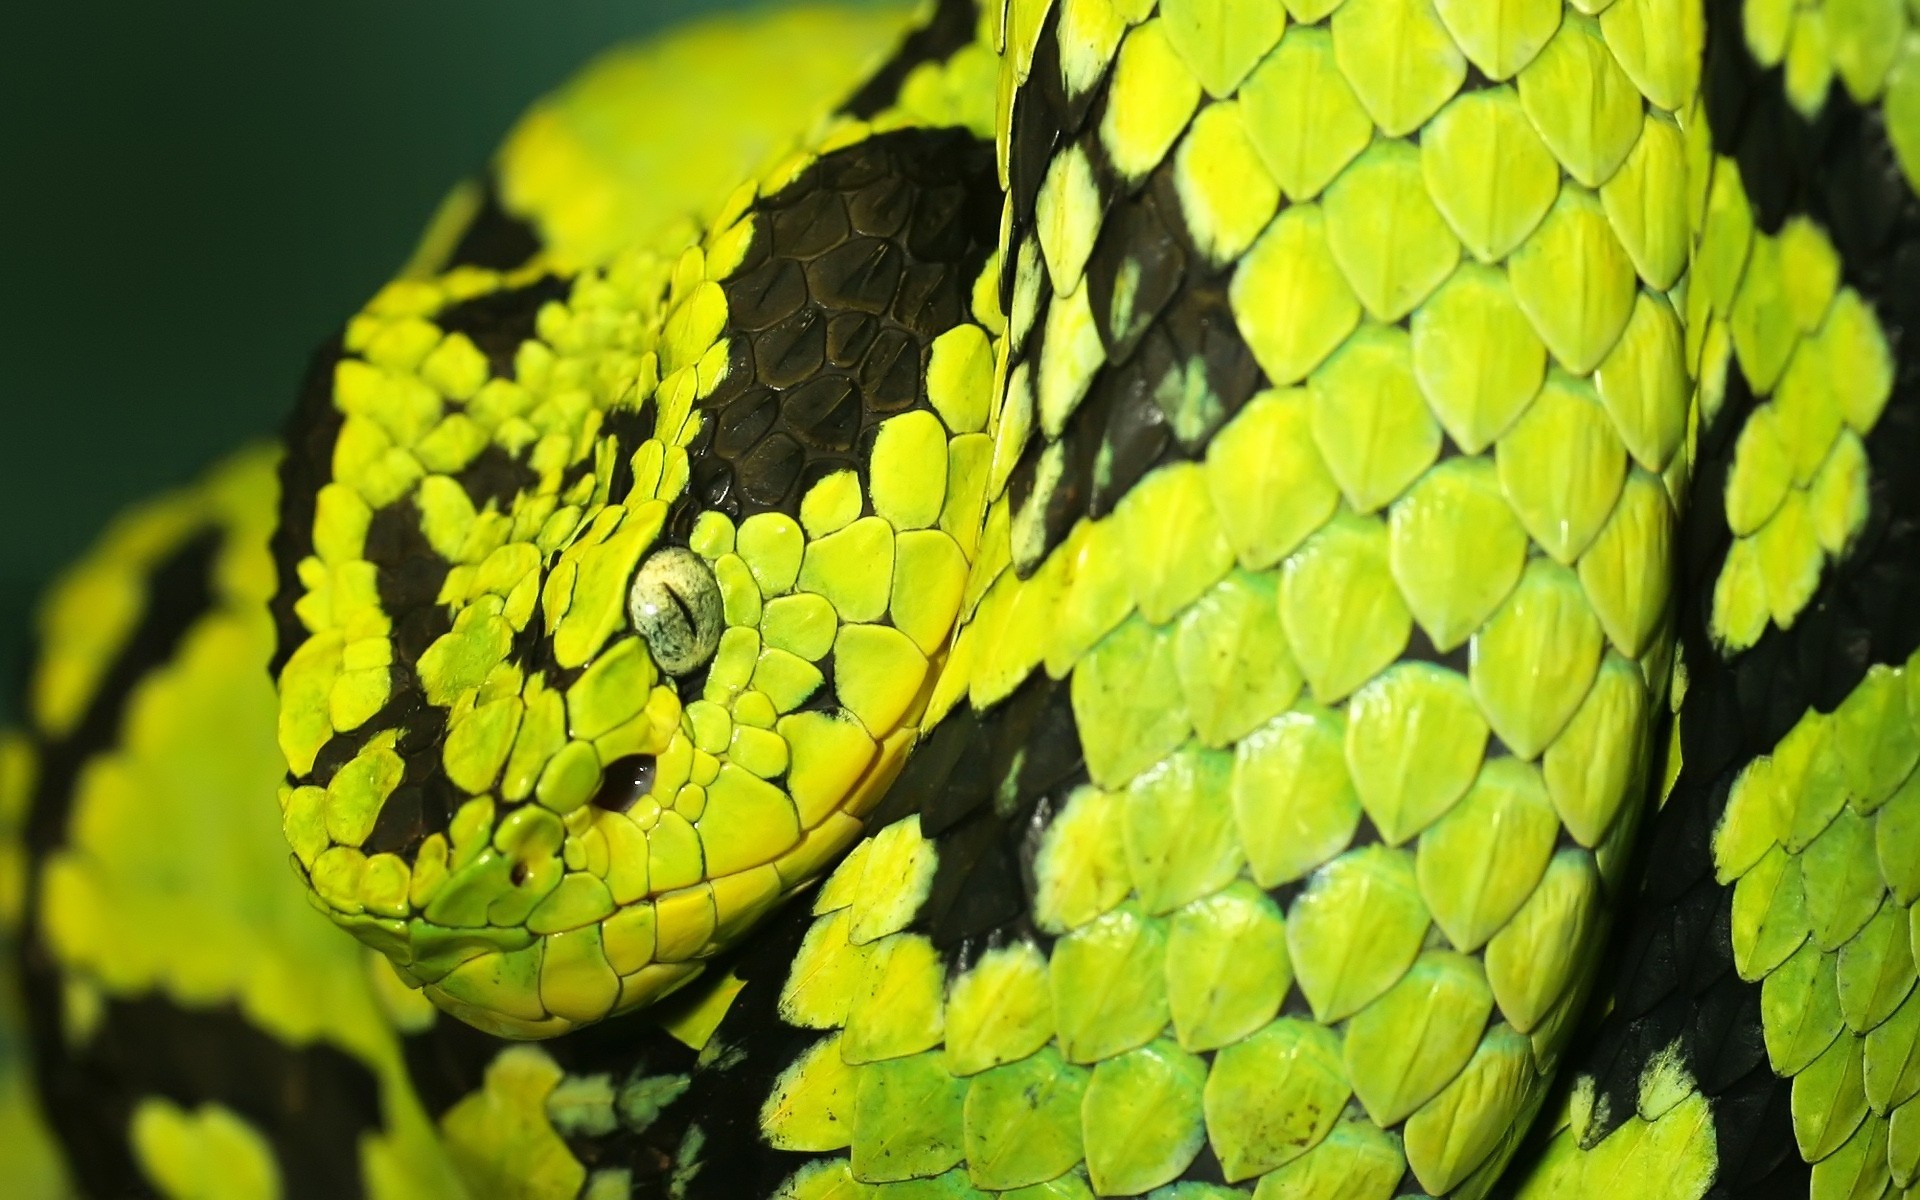 reptiles and frogs snake nature reptile python viper leaf wildlife poison tree biology pattern desktop venom exotic color animal feather boa flora garden